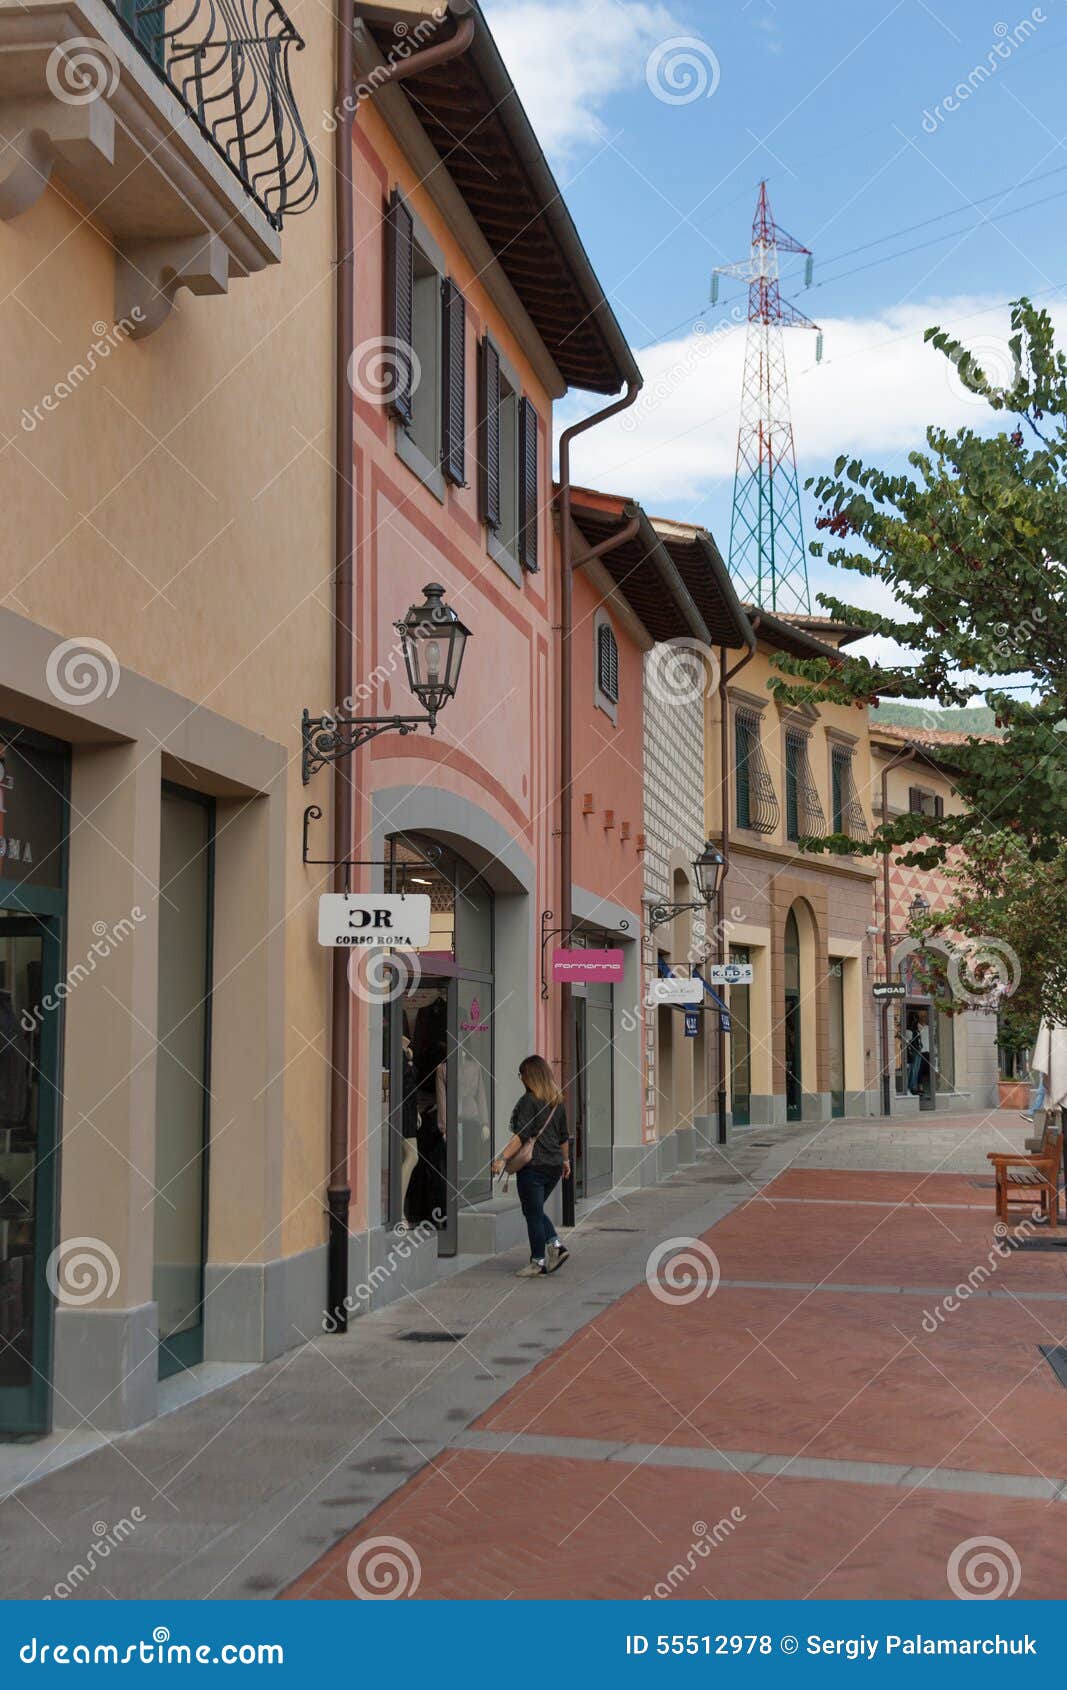 McArthurGlen Designer Outlet Barberino In Italy Editorial Stock Photo - Image of mall, clothing ...